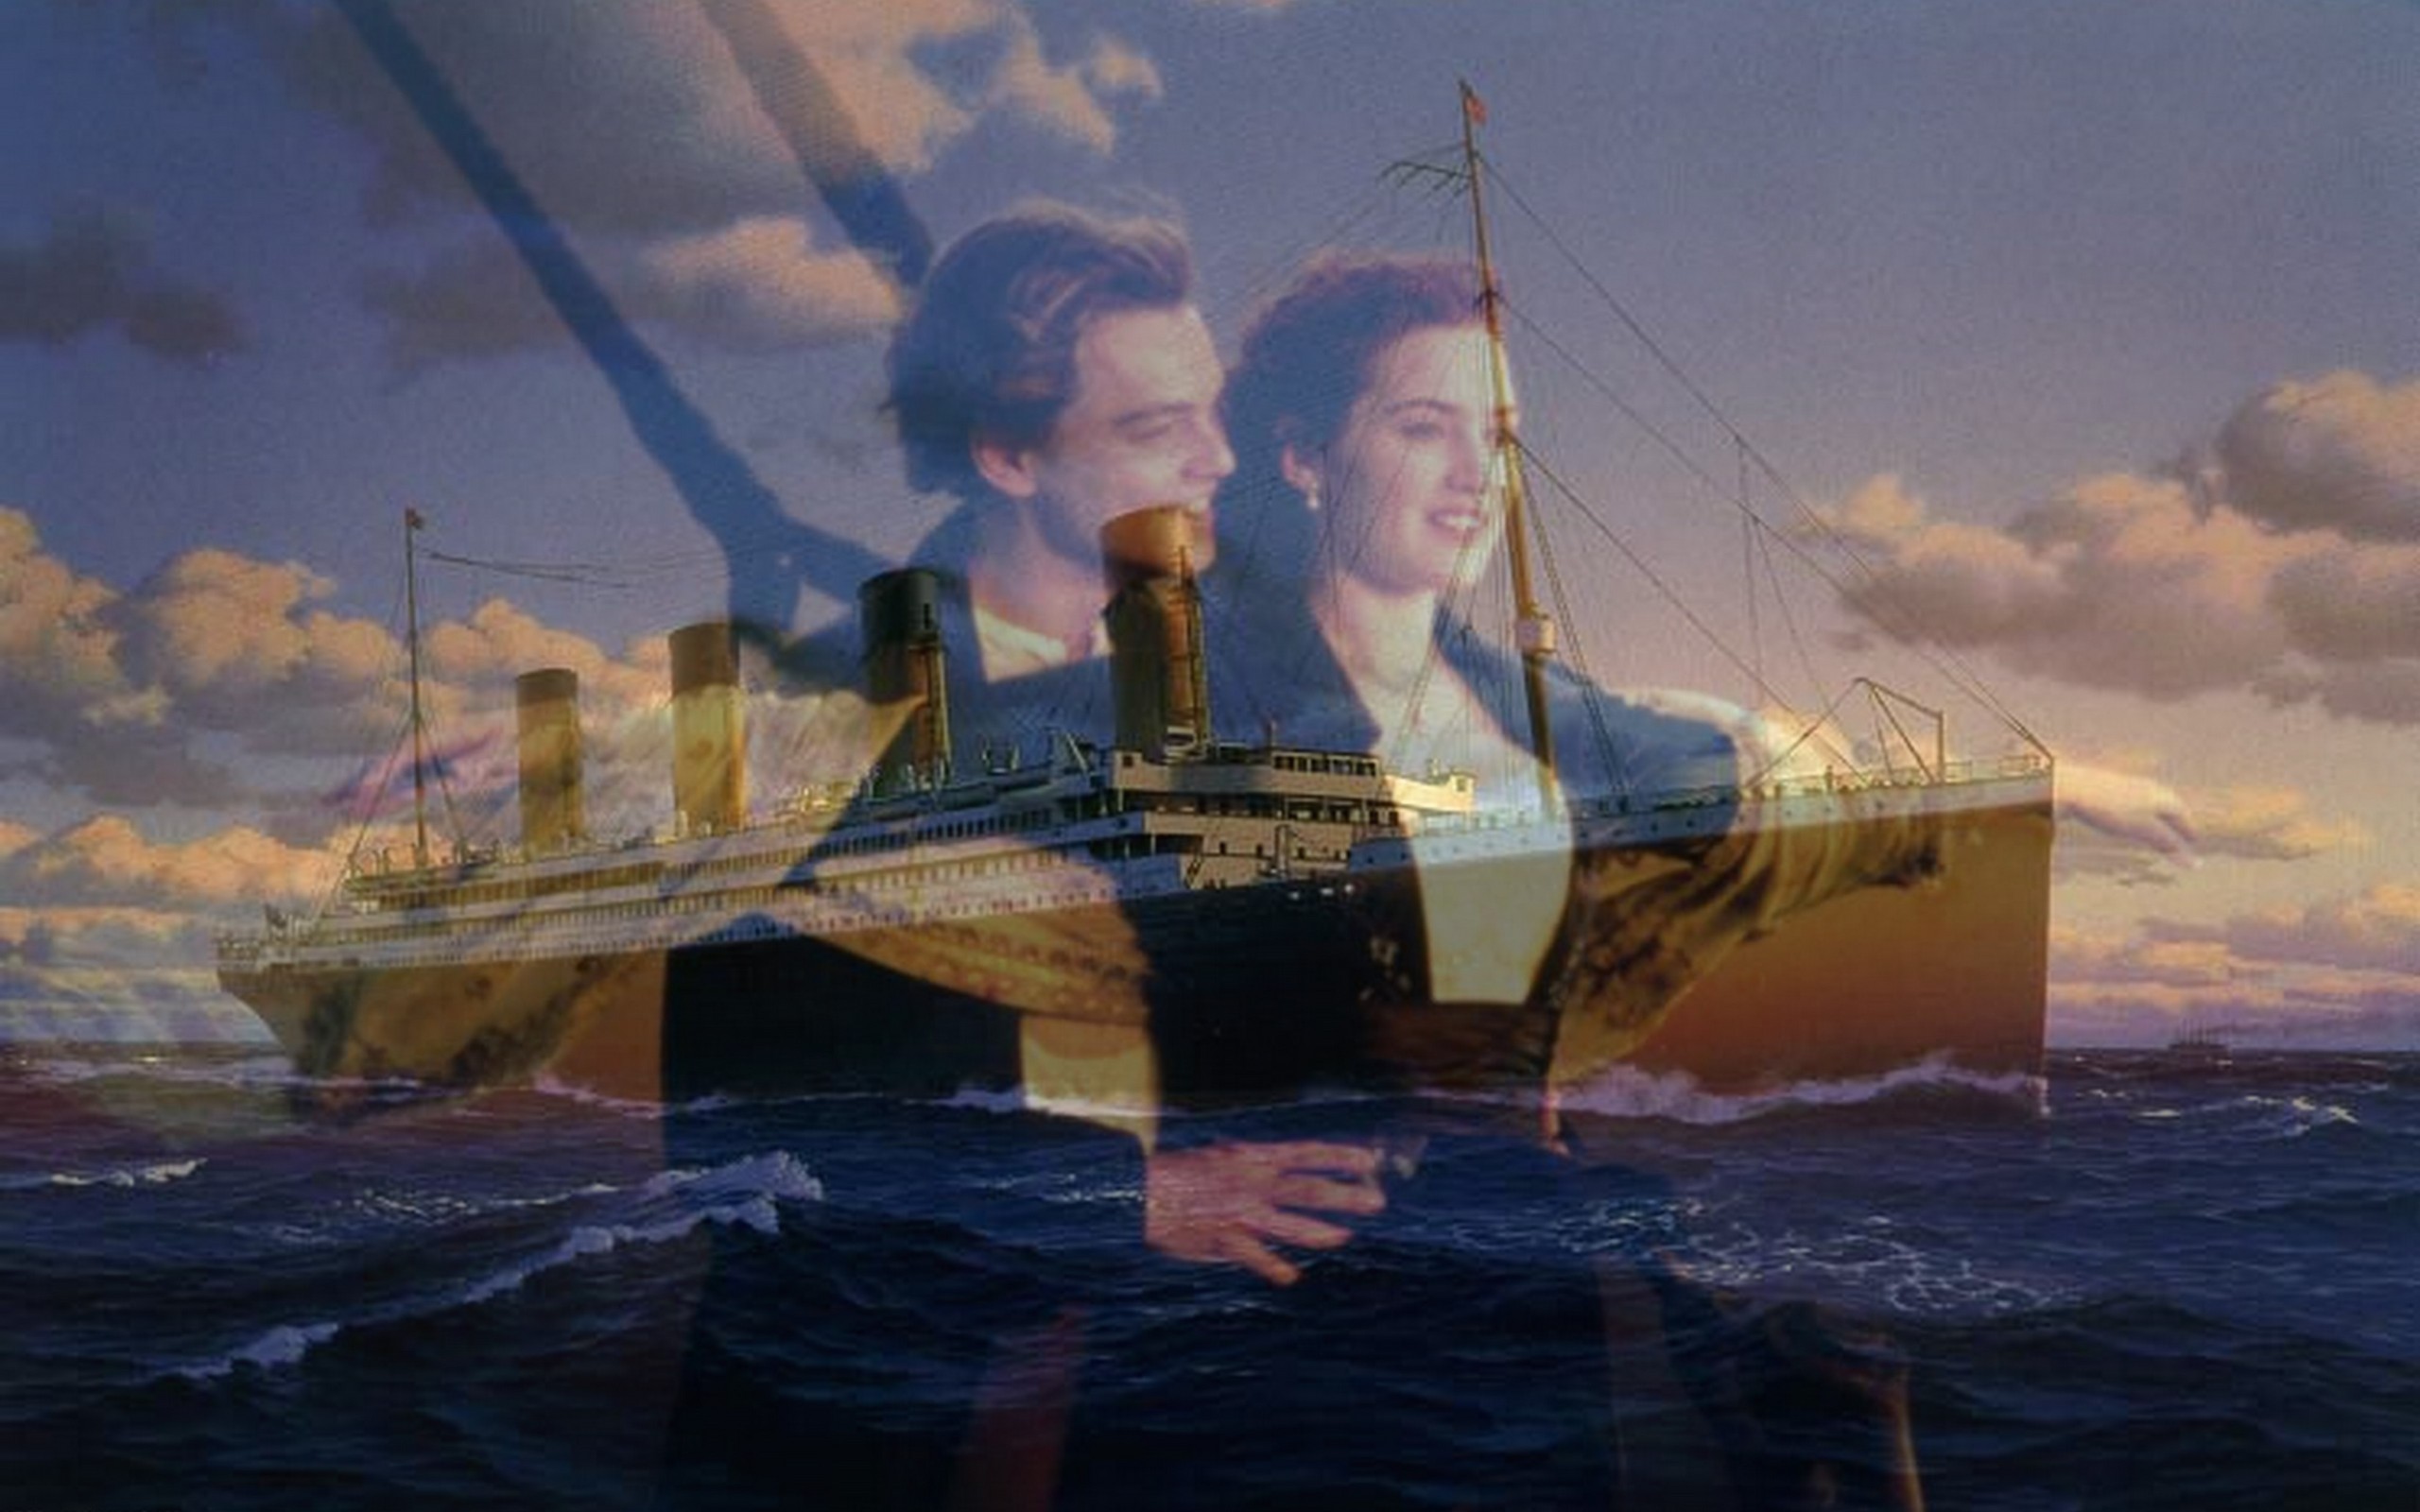 320x240px Titanic Backgrounds For Mobile 51.15 KB #391126